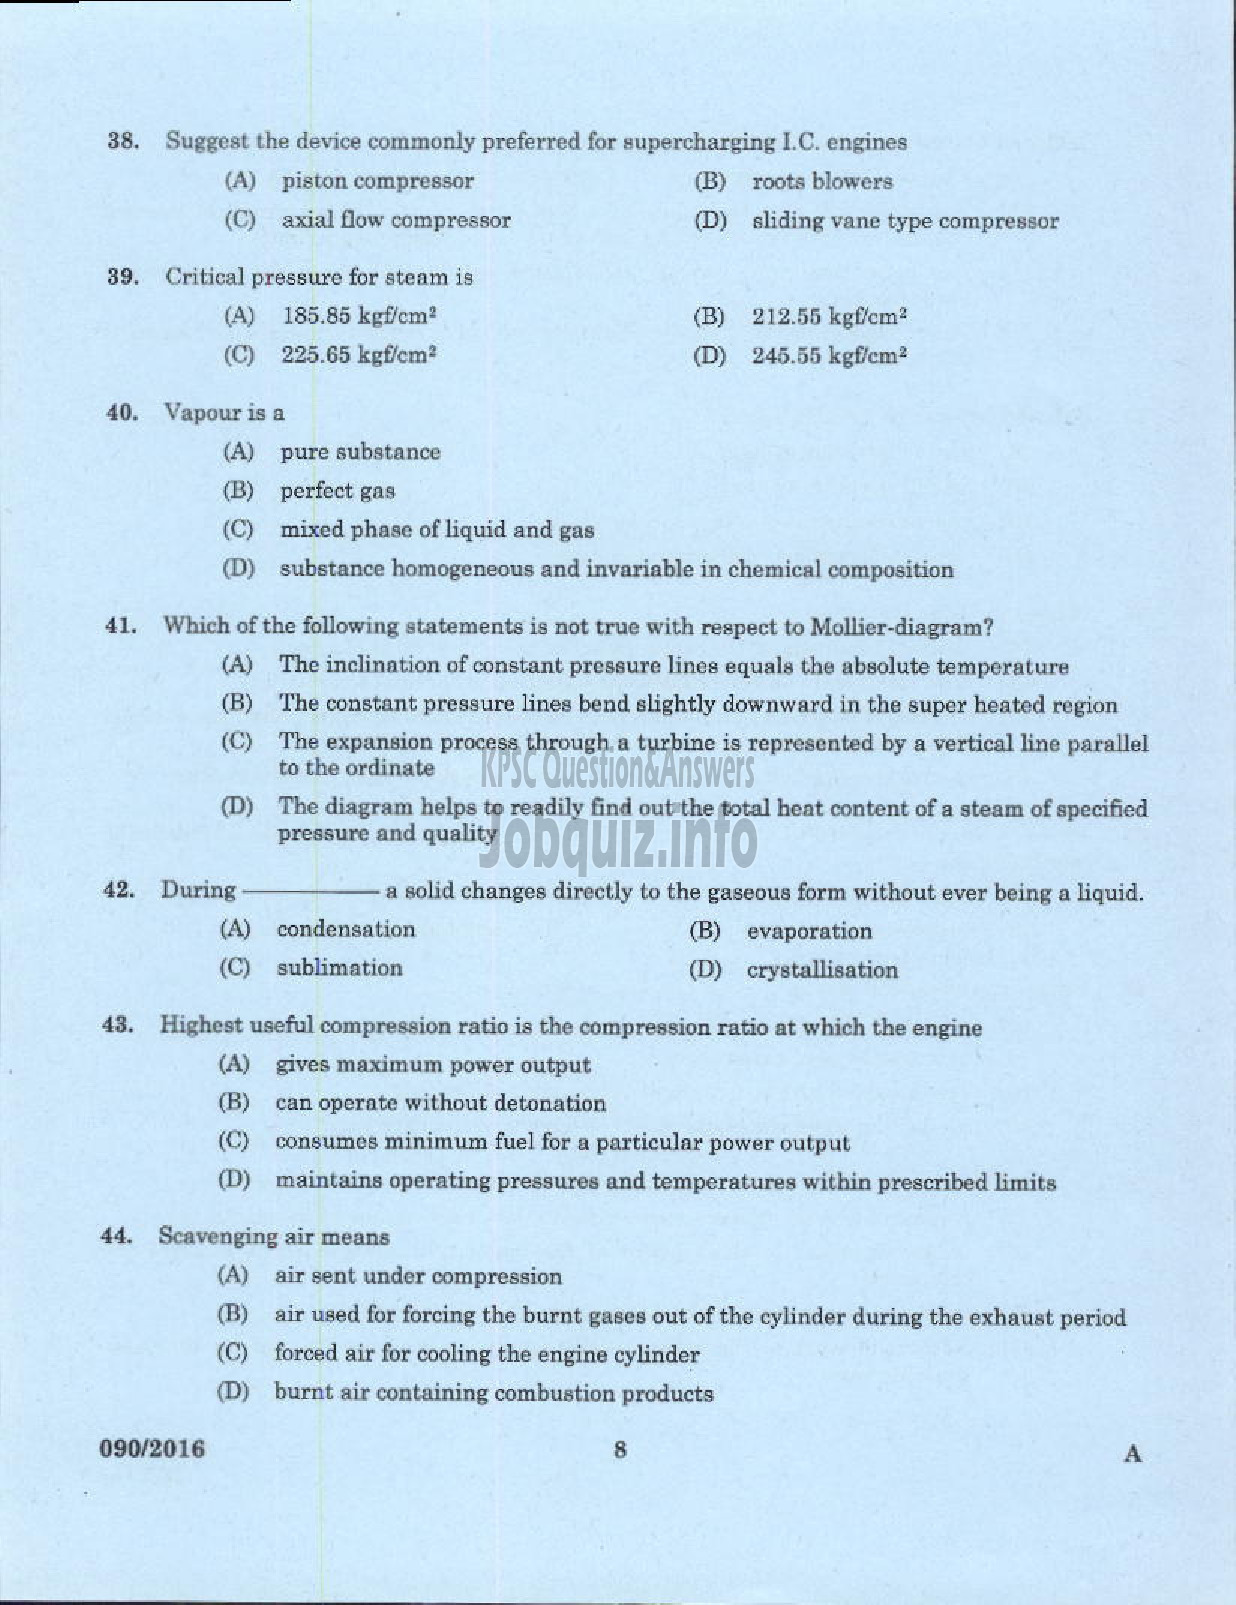 Kerala PSC Question Paper - VOCATIONAL INSTRUCTOR IN REFRIGERATION AND AIR CONDITIONING VHSE-6